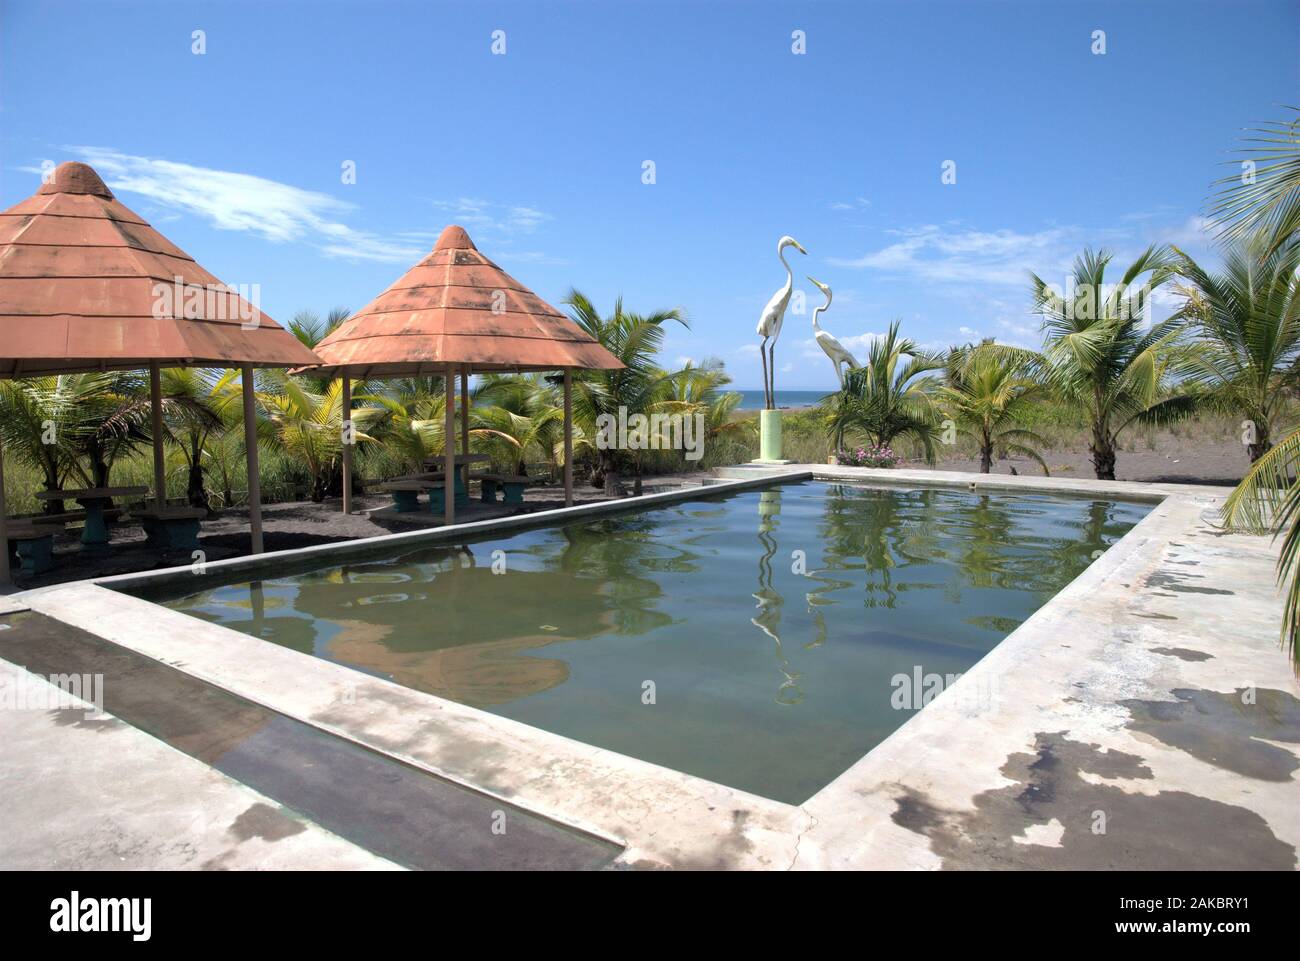 A pool on the beach of central Panama in Central America Stock Photo